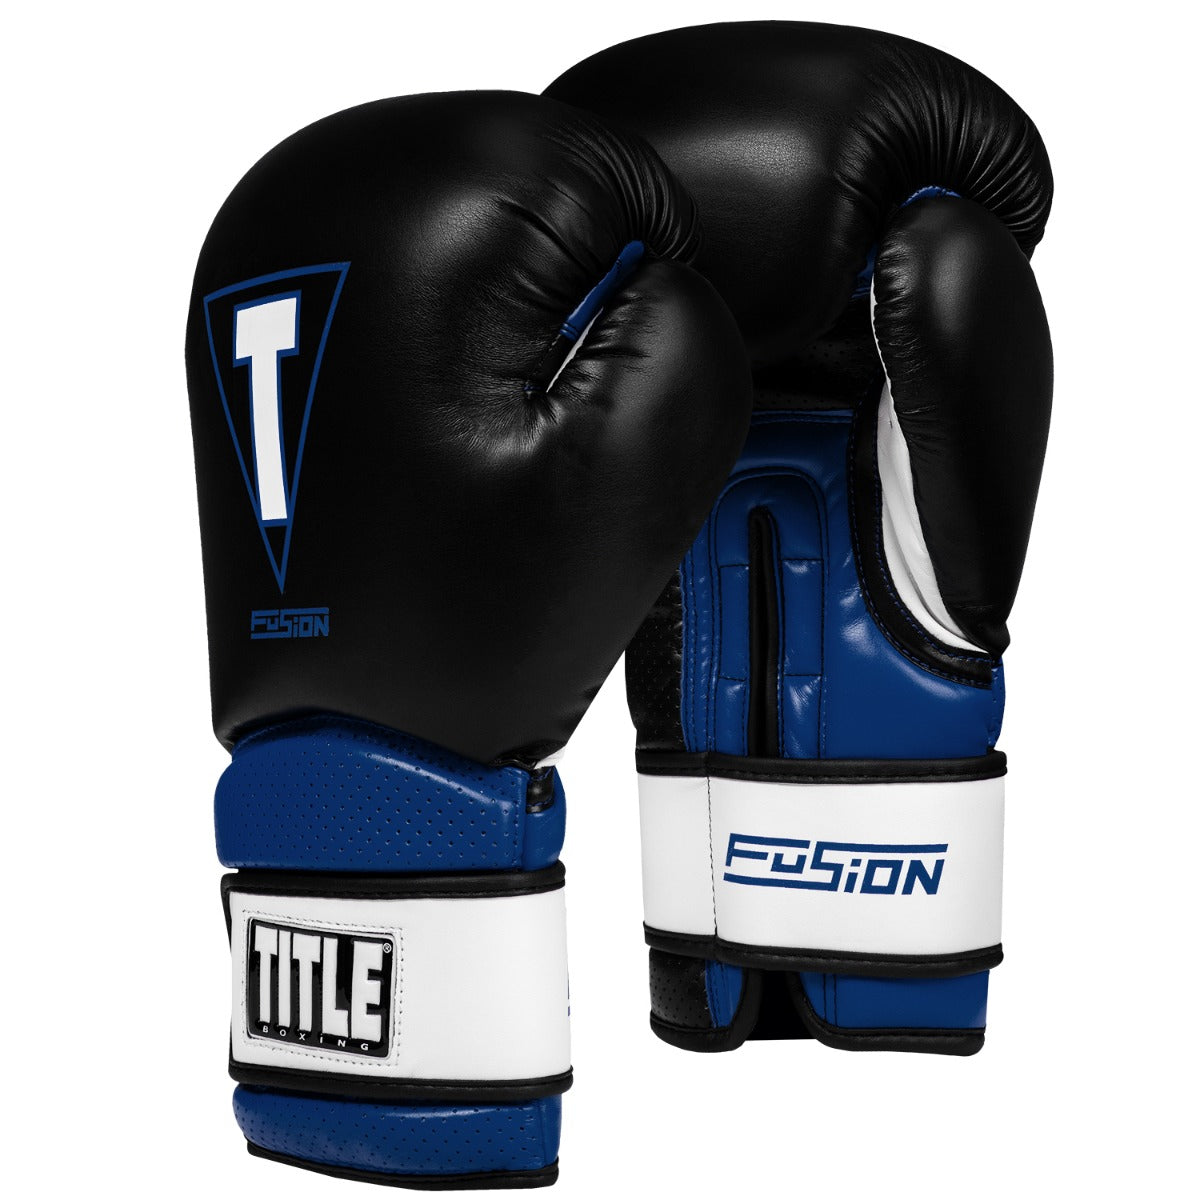 TITLE Fusion Tech Training Gloves